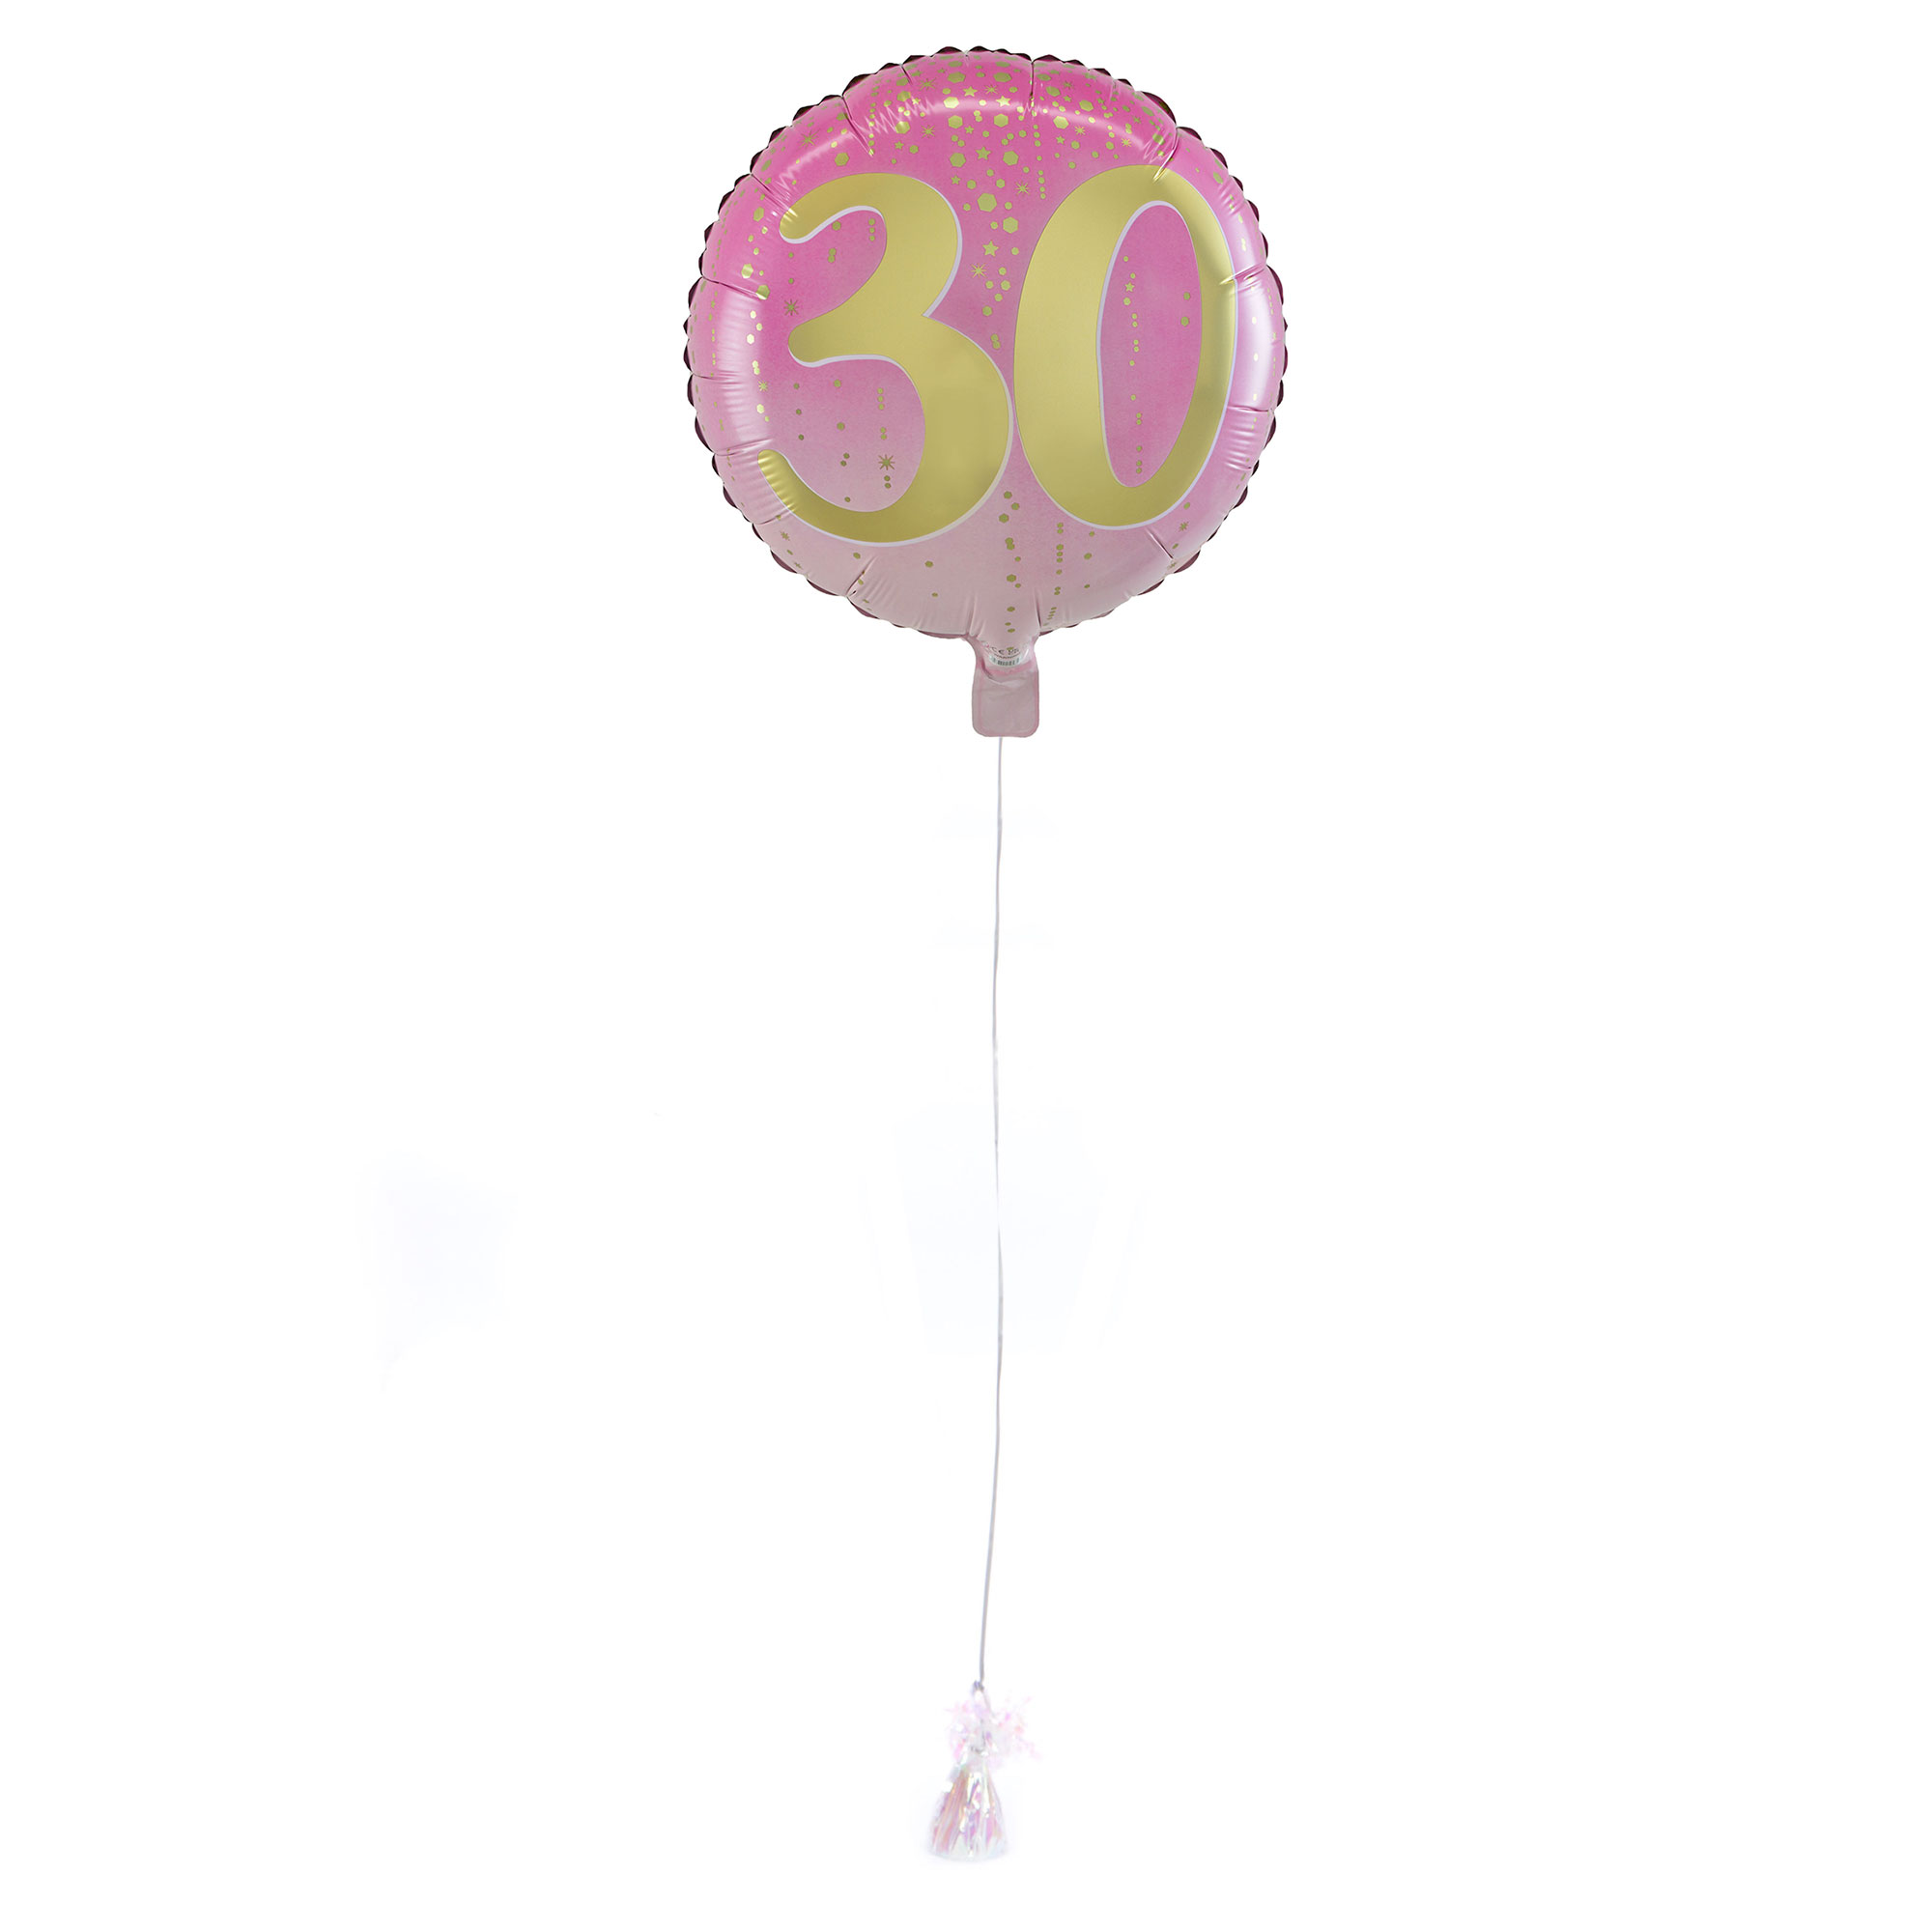 Pink & Gold 30th Birthday Balloon & Lindt Chocolates - FREE GIFT CARD!